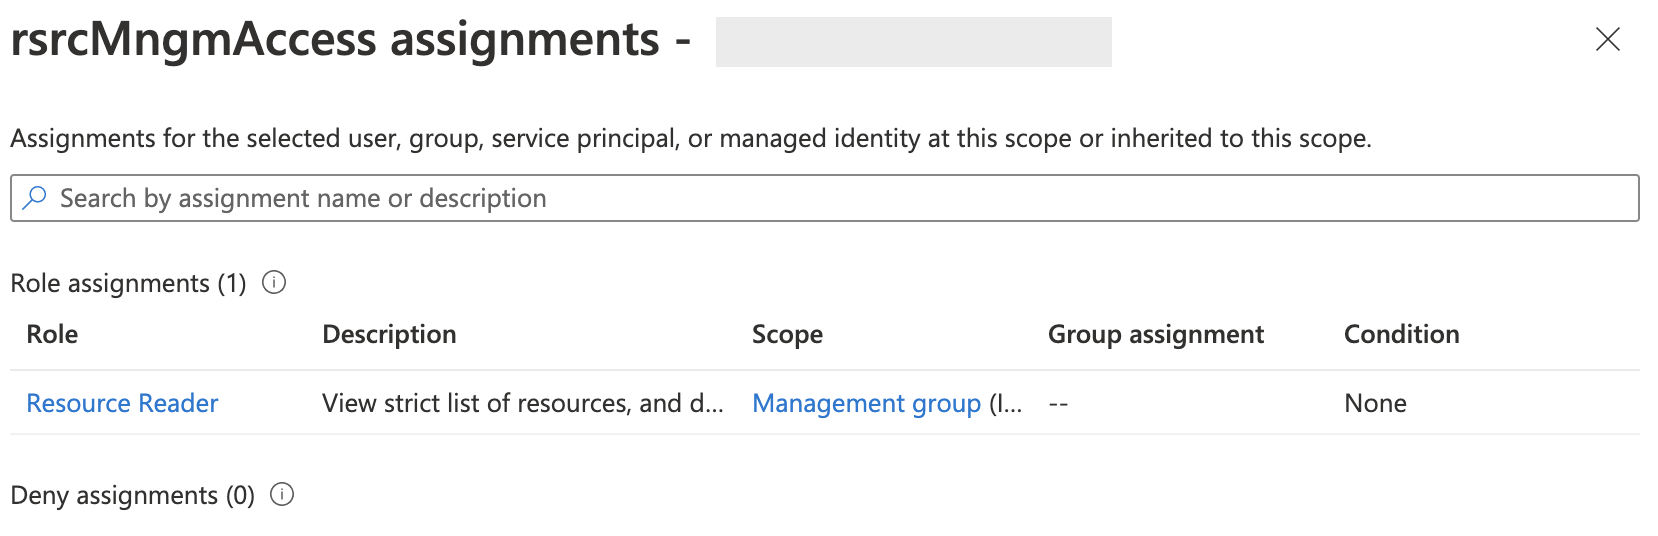 Role assignments showing the resource reader role in the Management Group scope.